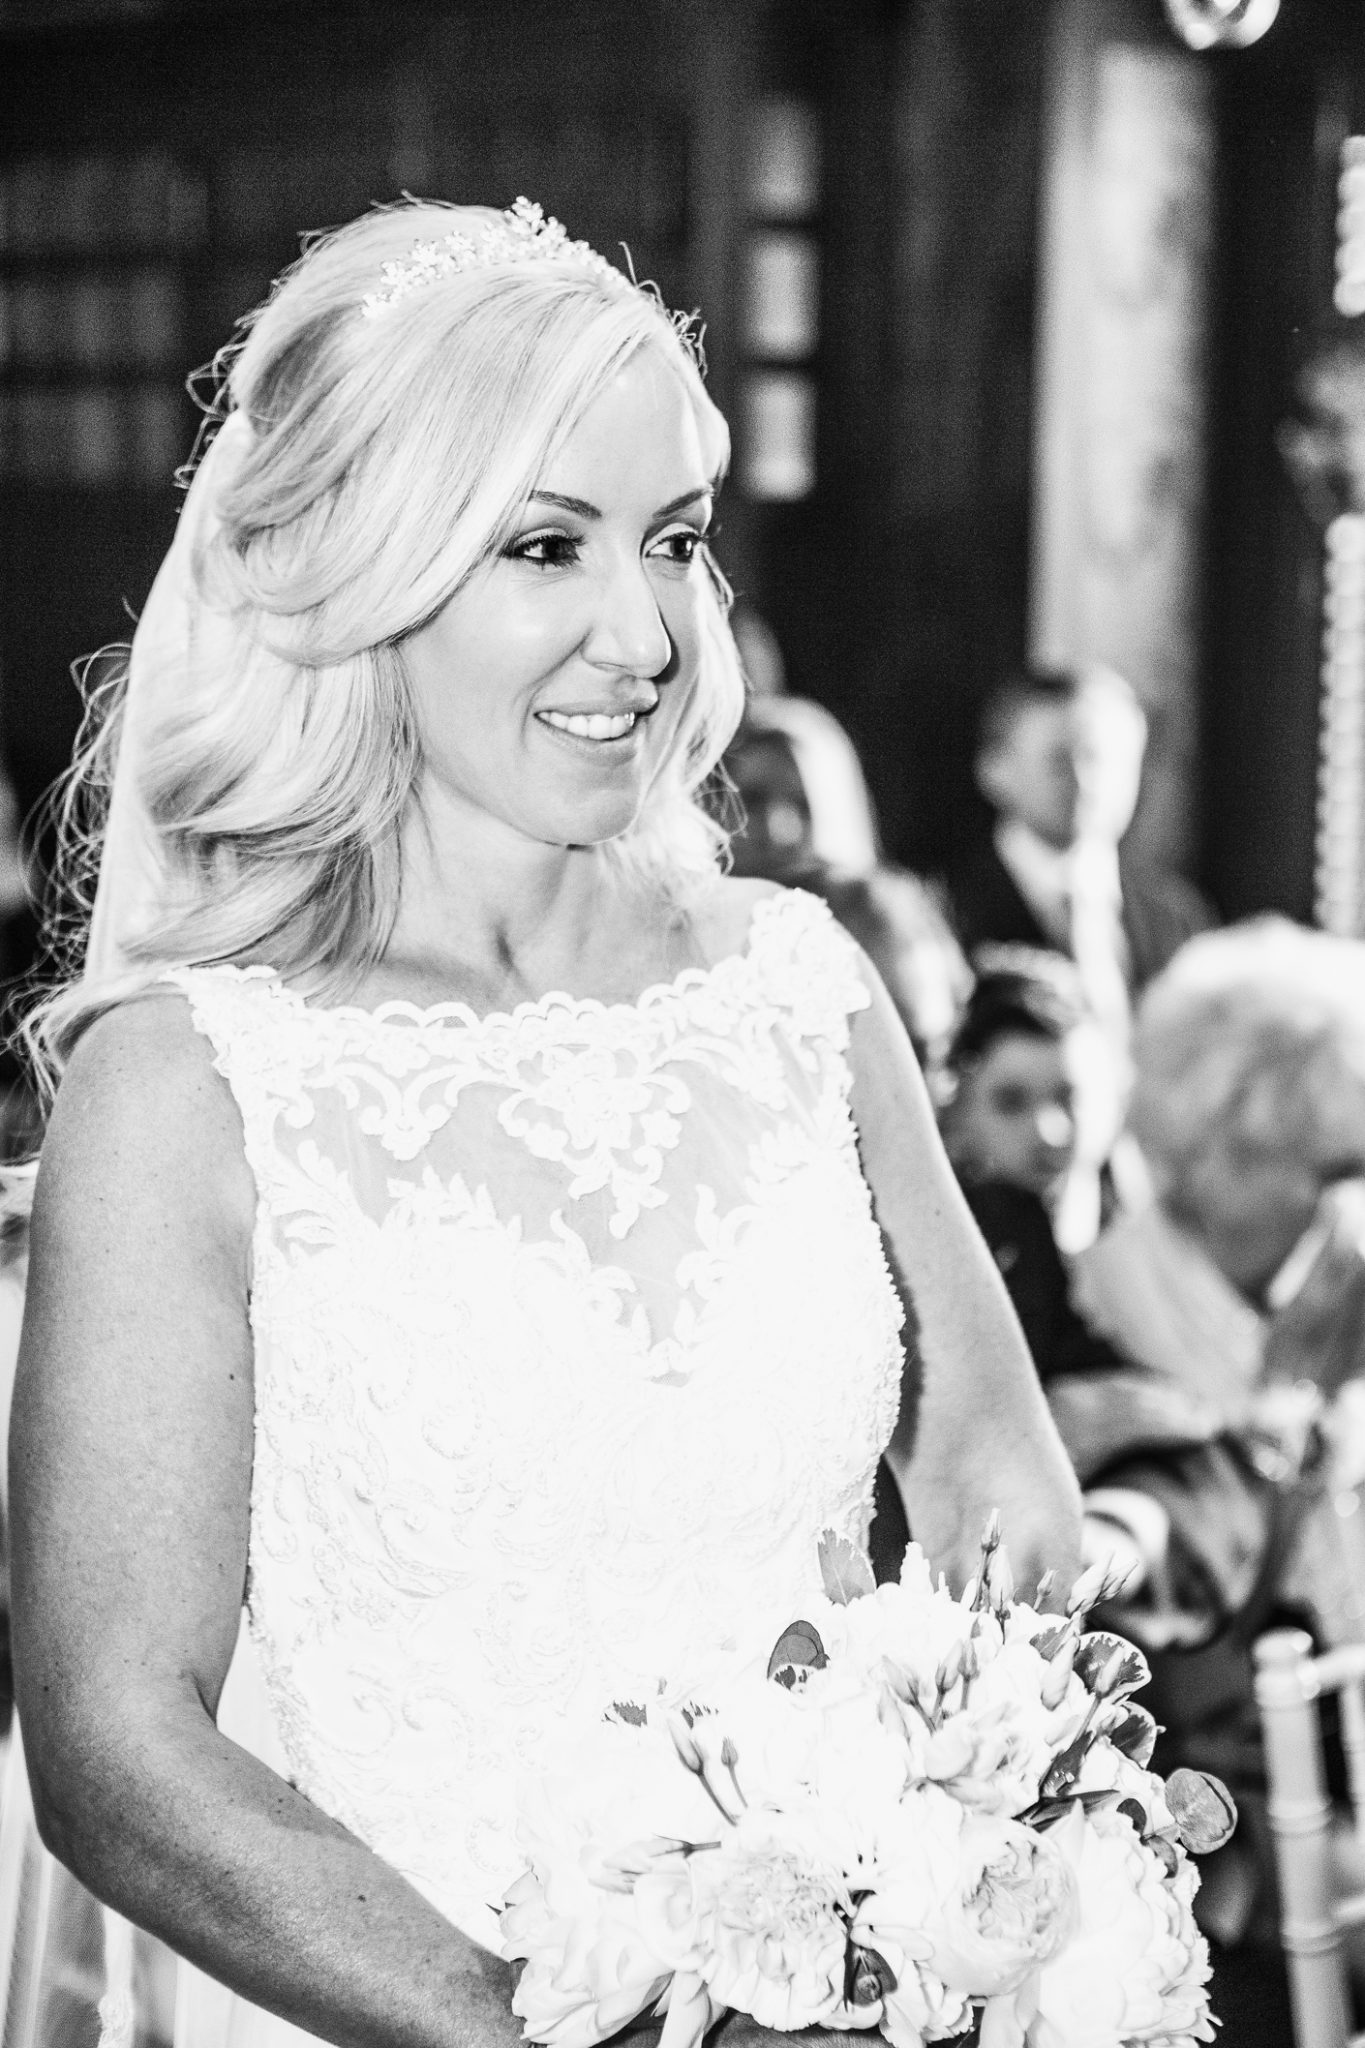 wedding-photography-of-the-bride-at-the-civil-ceremony-at-the-belle-epoque-knutsford-cheshire